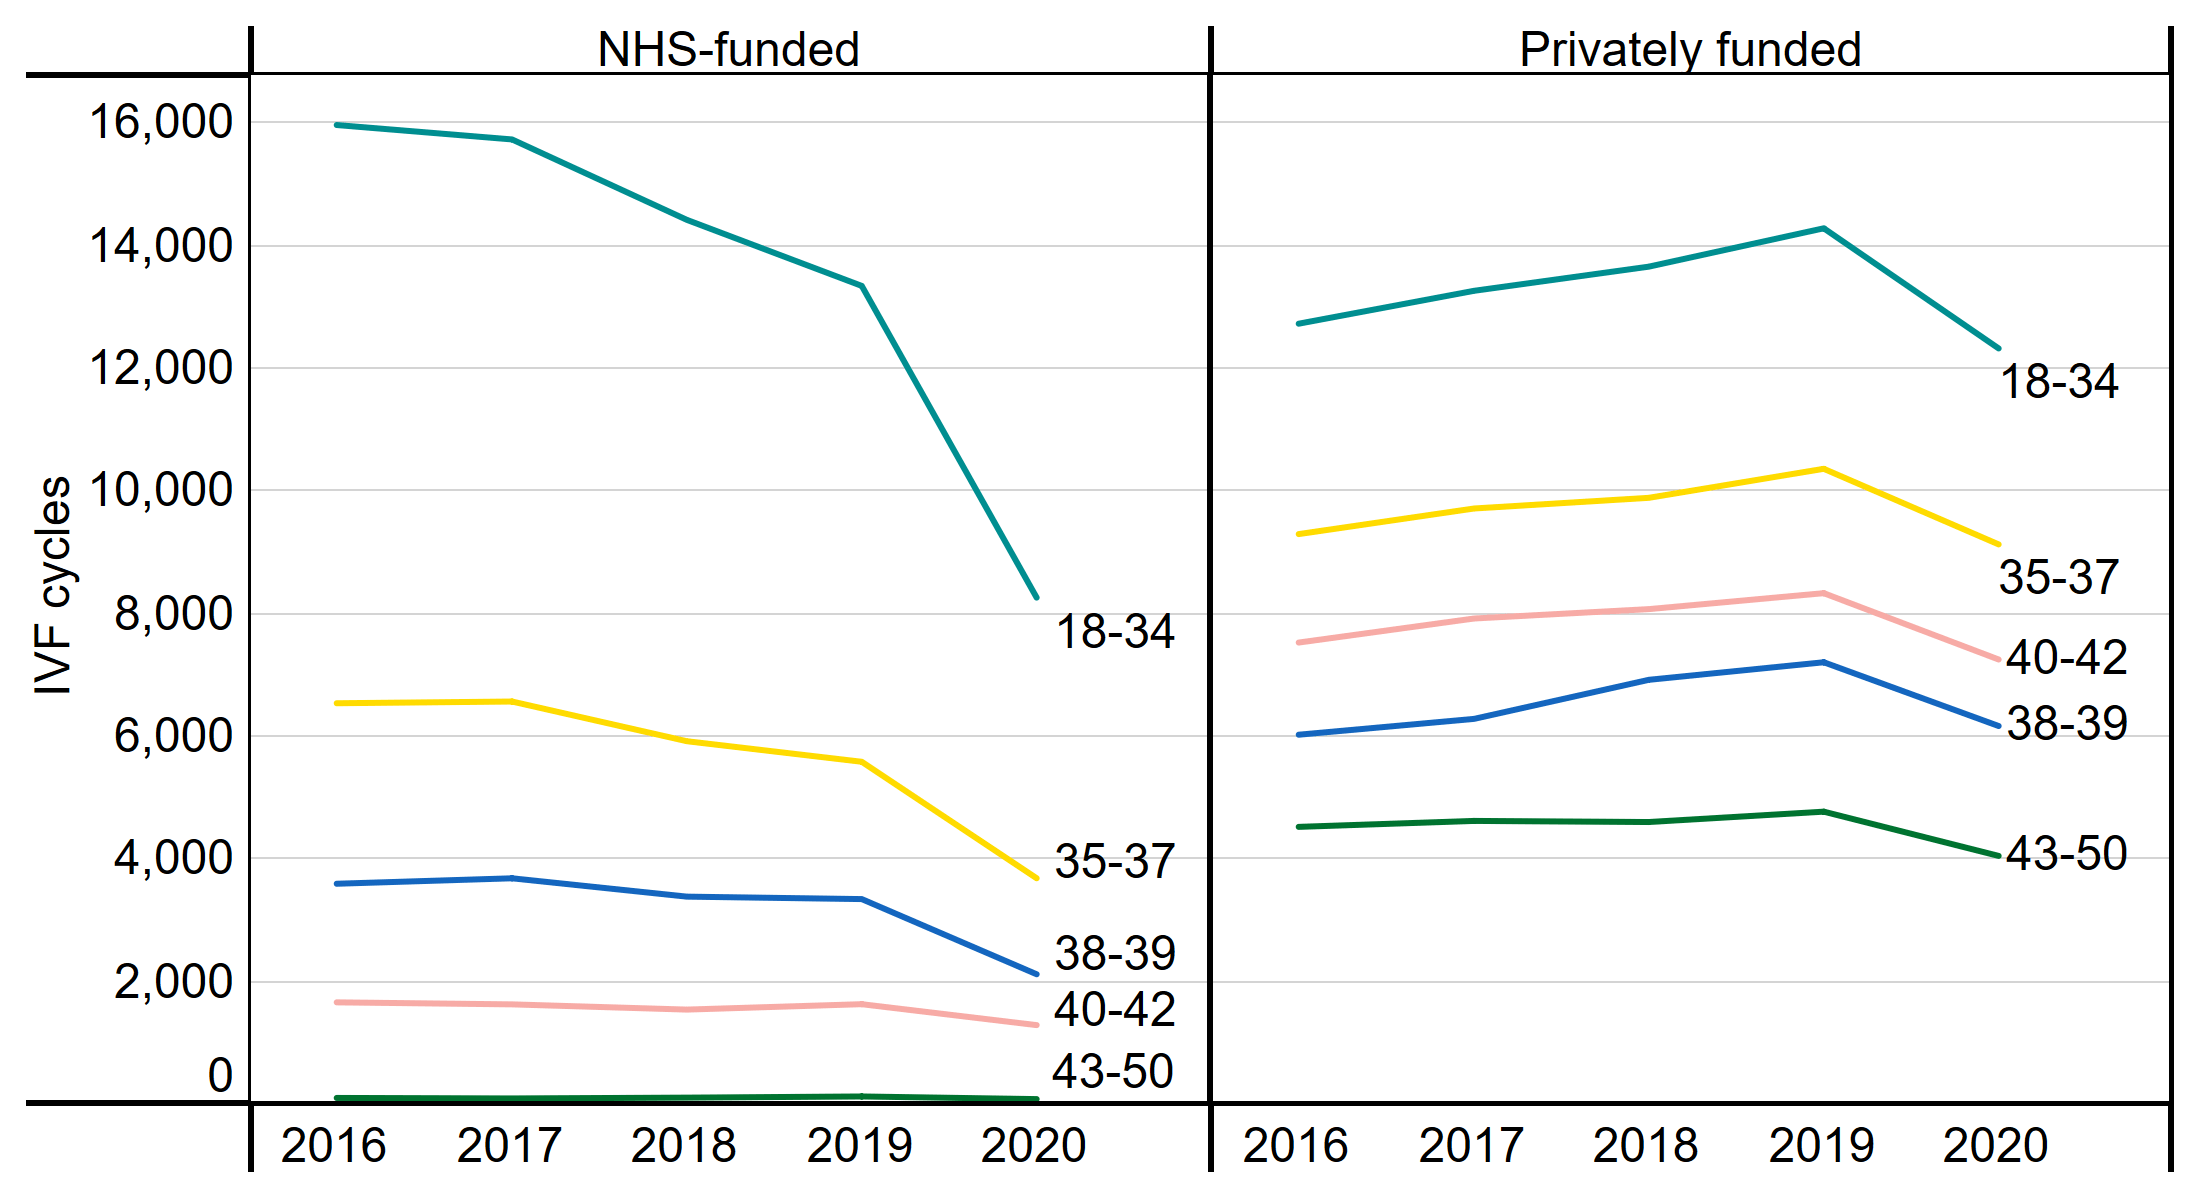 Figure 2: Number of IVF cycles by funding type and patient age group, 2016-2020. Number of IVF cycles by funding type and patient age group, 2016-2020. This line chart shows the number of IVF cycles carried out in each patient age group (18-34, 35-37, 38-39, 40-42, 43-50), split by NHS-funded and privately funded treatments, from 2016-2020. IVF cycles decreased for all ages in 2020. Younger patients, such as those aged 18-34 experienced the greatest decrease. An accessible form of the underlying data for this figure can be downloaded at the start of the report in .xls format.